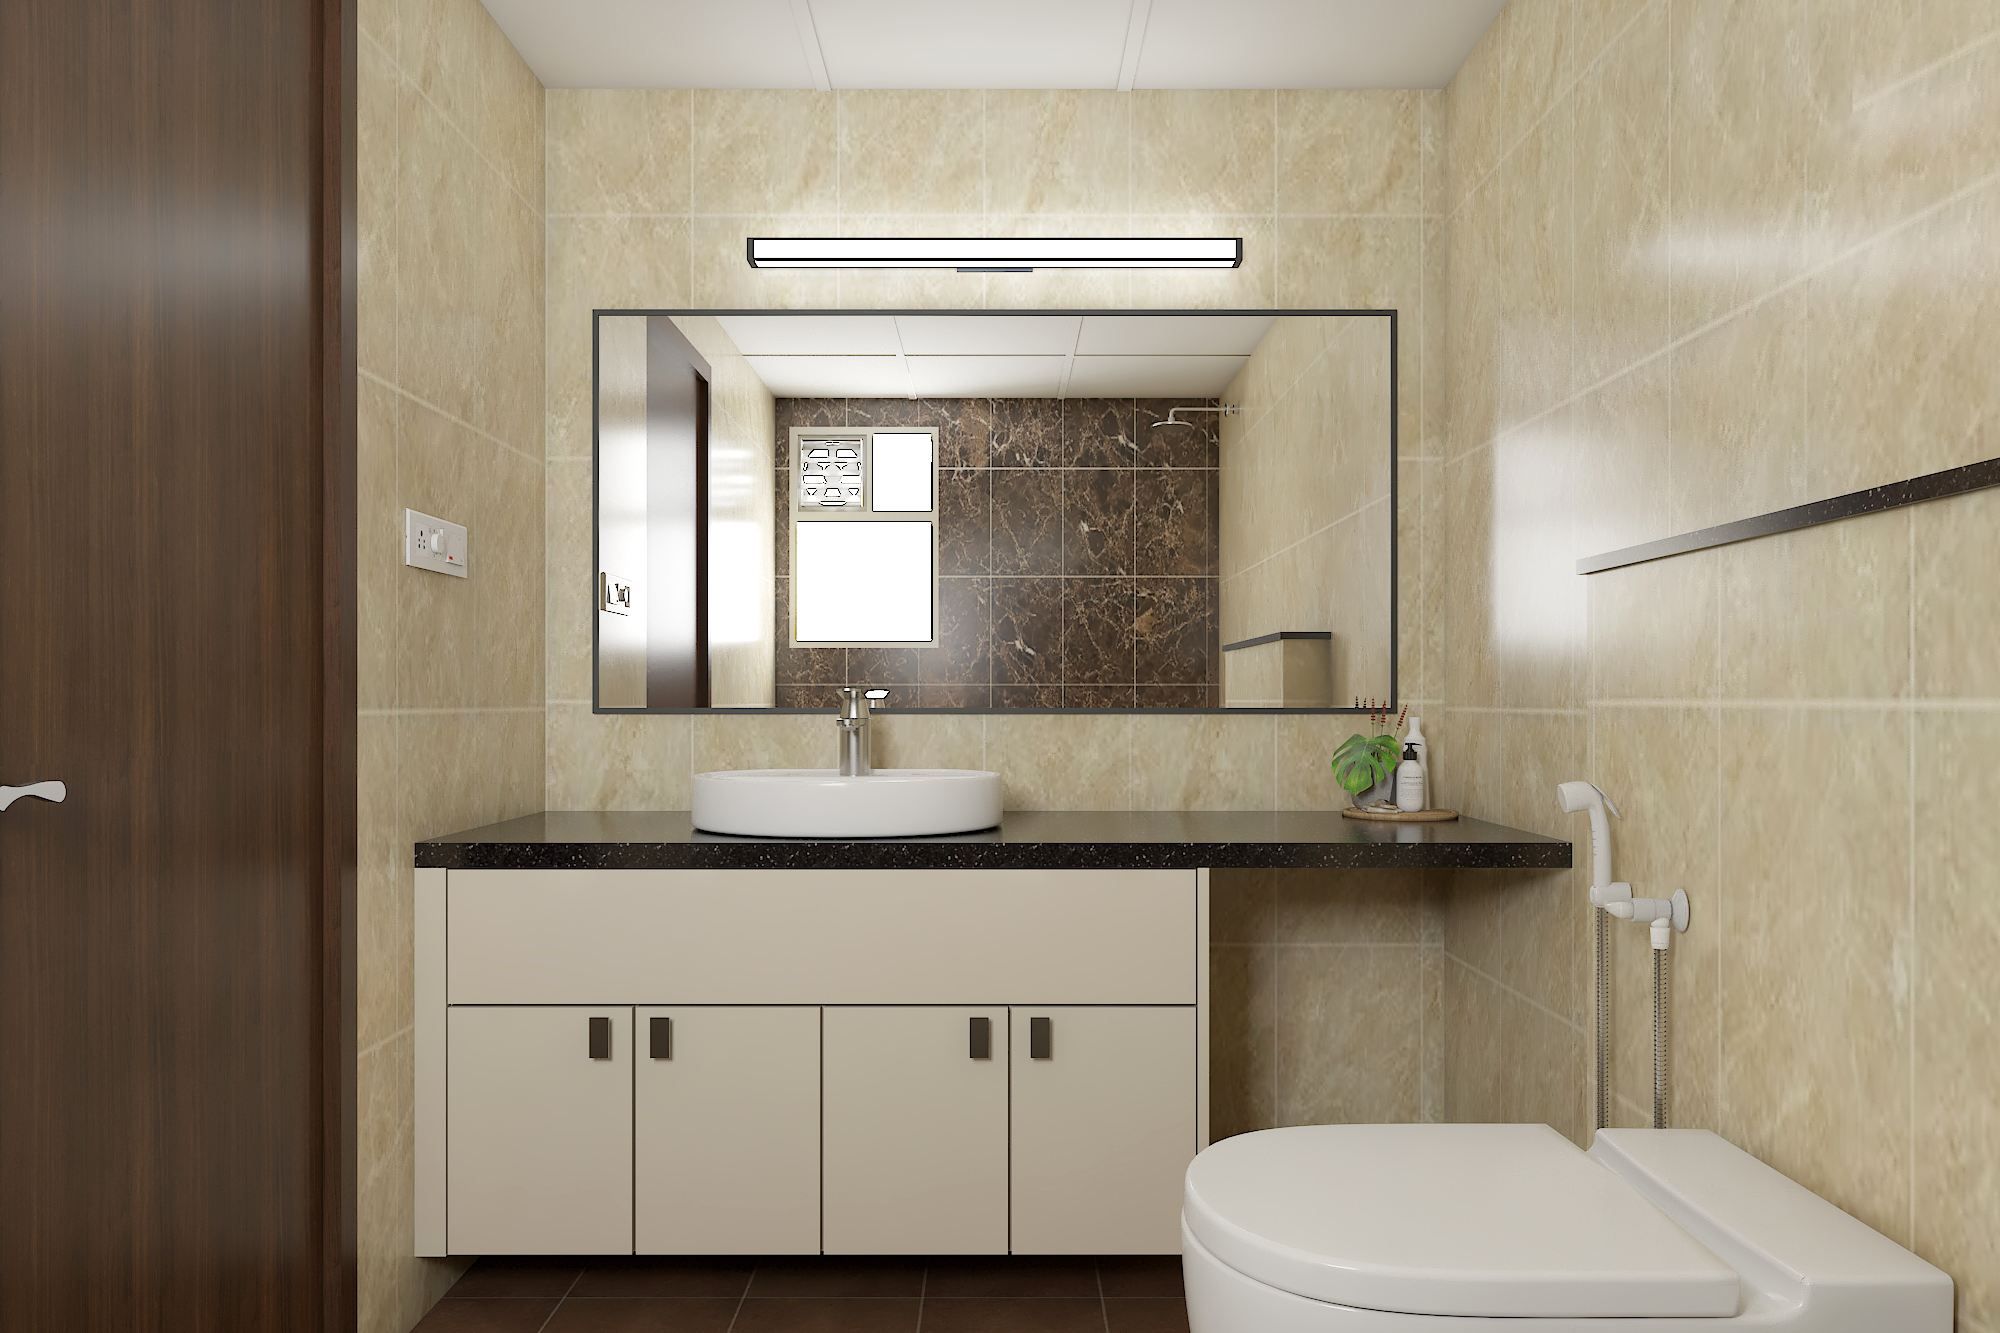 Modern Spacious Bathroom Design With Wall-Mounted Unit